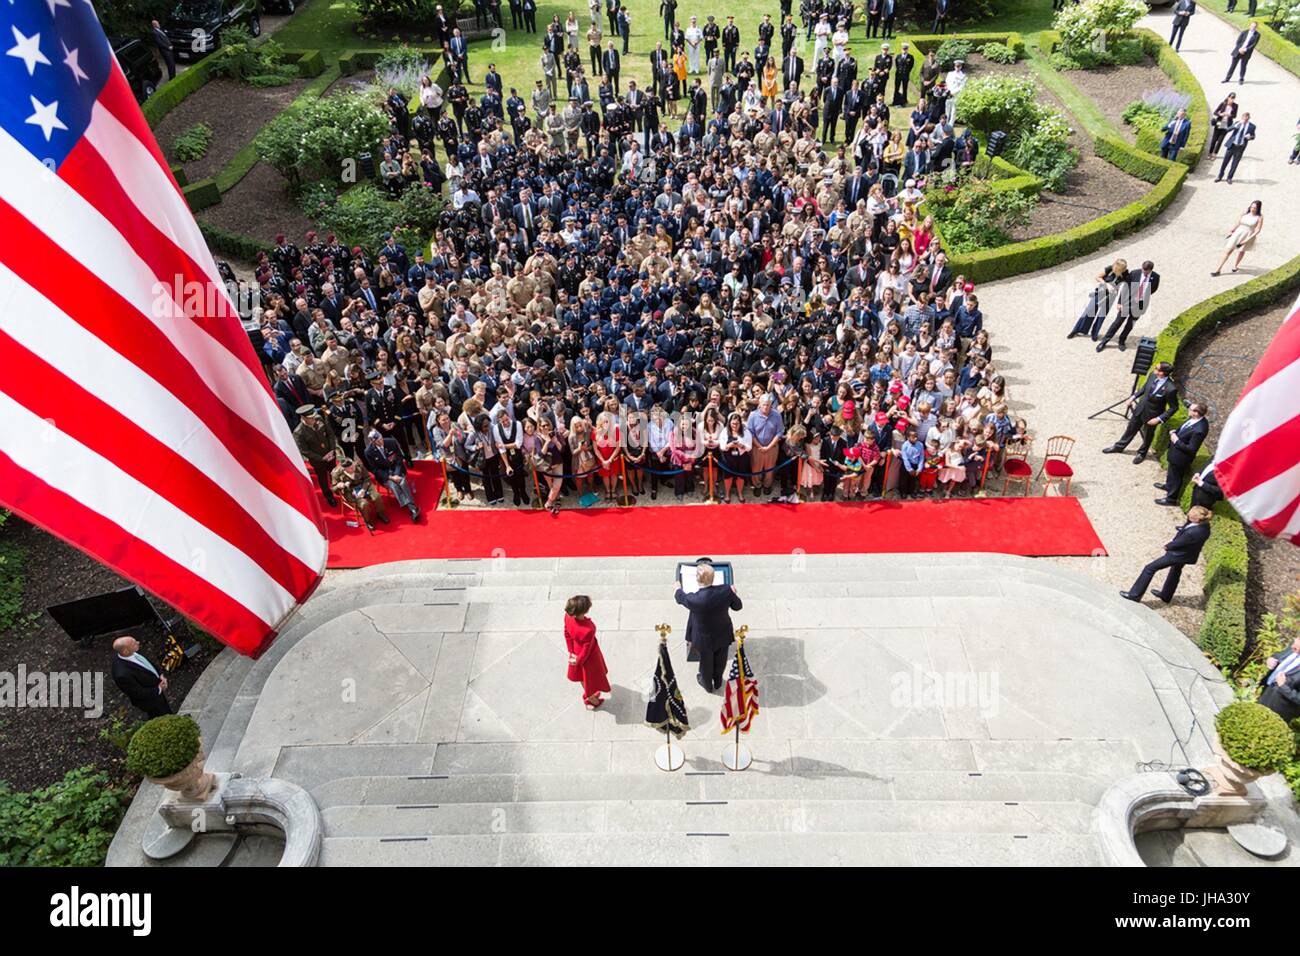 Paris, France. 13th July, 2017. U.S. President Donald Trump and First Lady Melania Trump address veterans gathered at the U.S. Embassy July 13, 2017 in Paris, France. The first family is in Paris to commemorate the 100th anniversary of the United States' entry into World War I and attend Bastille Day celebrations. Credit: Planetpix/Alamy Live News Stock Photo